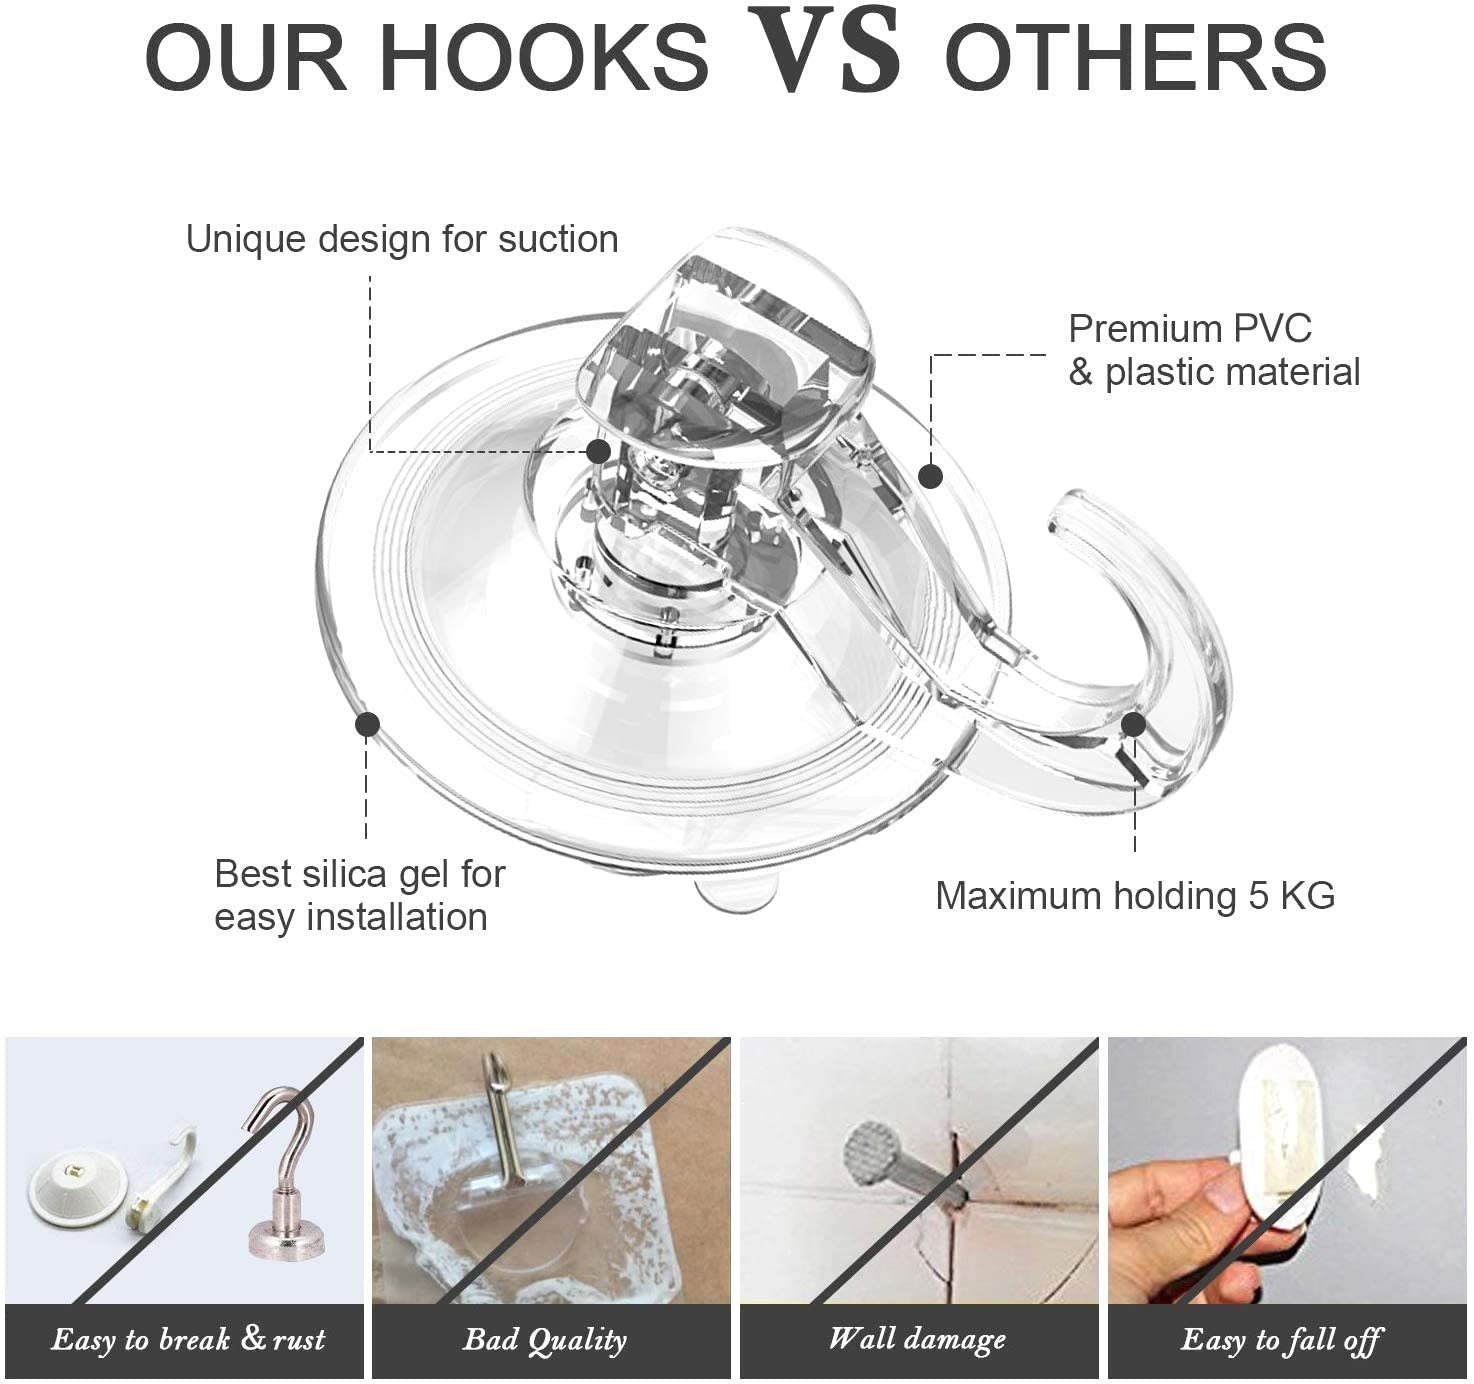 Suction Hooks No Drill Ulinek 4 Pack Suction Cup Hook Bathroom Kitchen Shower Wall Window Glass Door Sucker Hooks for Hanging Towel Coat Clothes Hanger Holder Heavy Duty Max 5KG